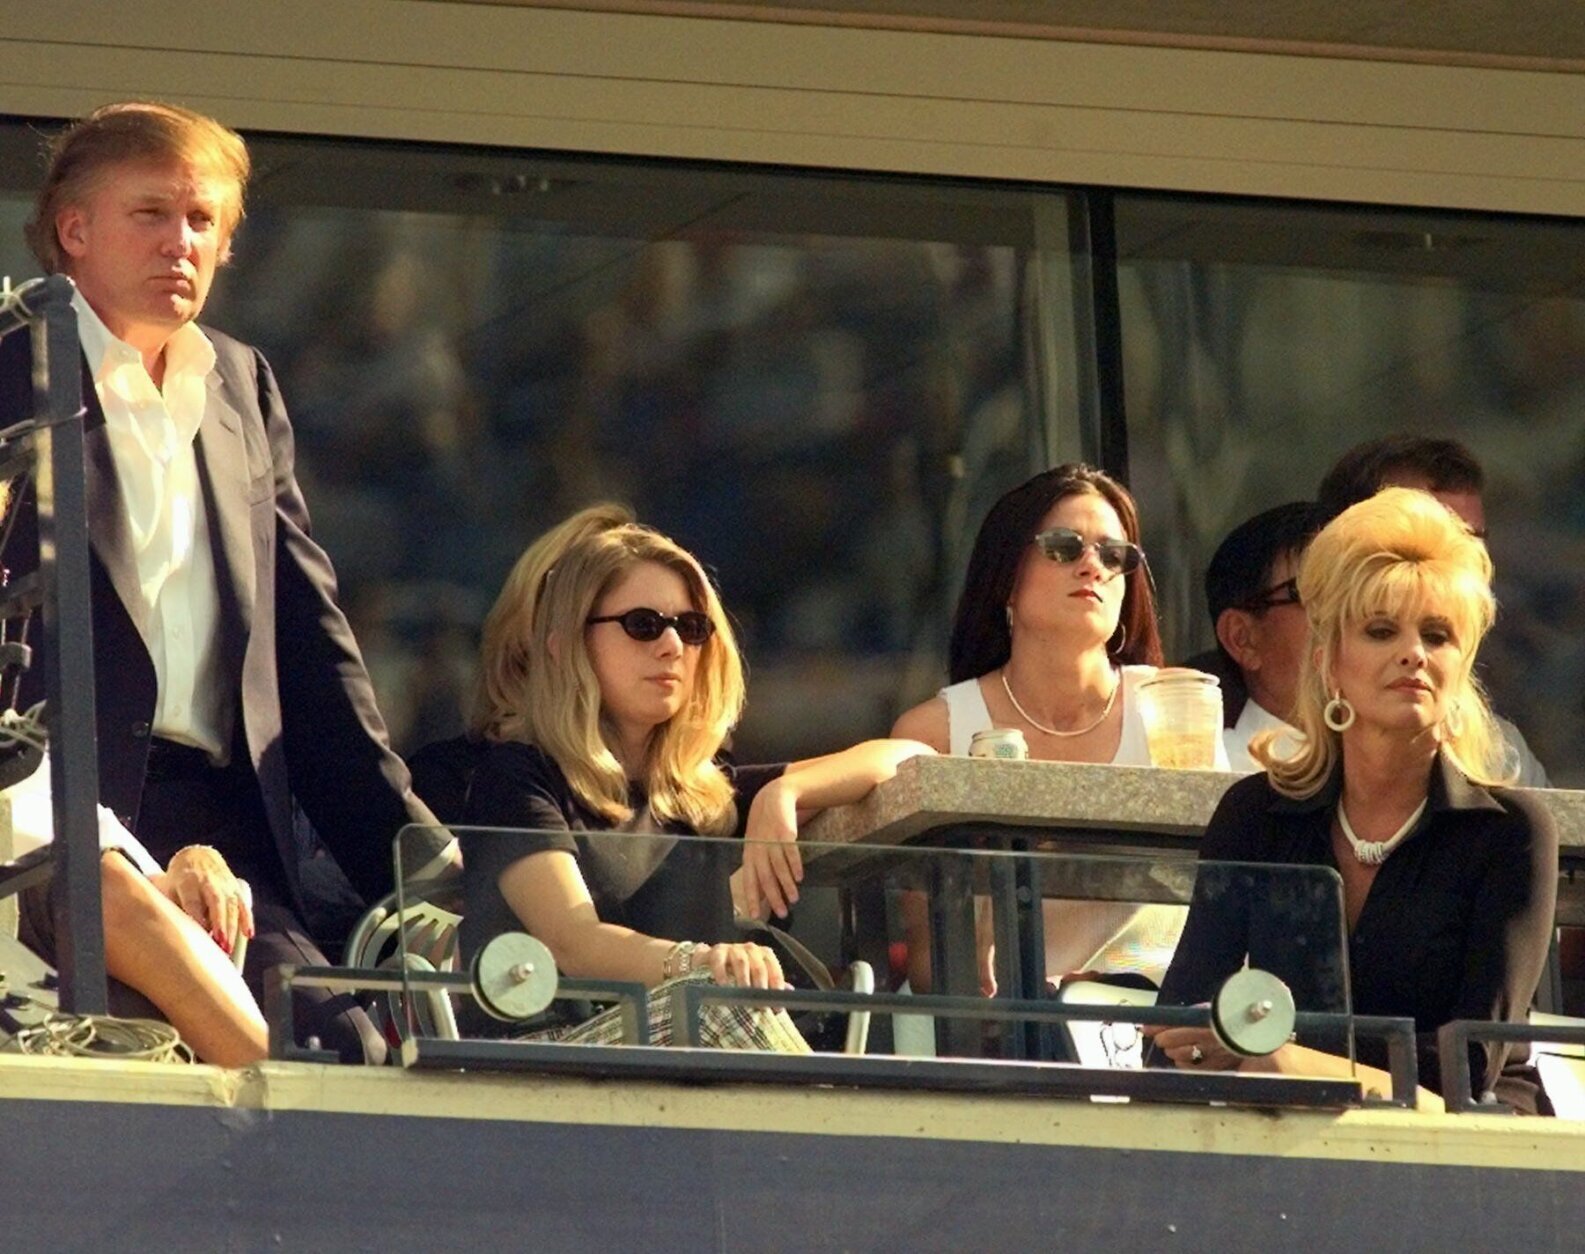 Donald Trump, left, his daughter Ivanka, center, and ex-wife Ivana watch the men's semifinal match from their box at the U.S. Open in New York Saturday, Sept. 6, 1997.   (AP Photo/Richard Drew)